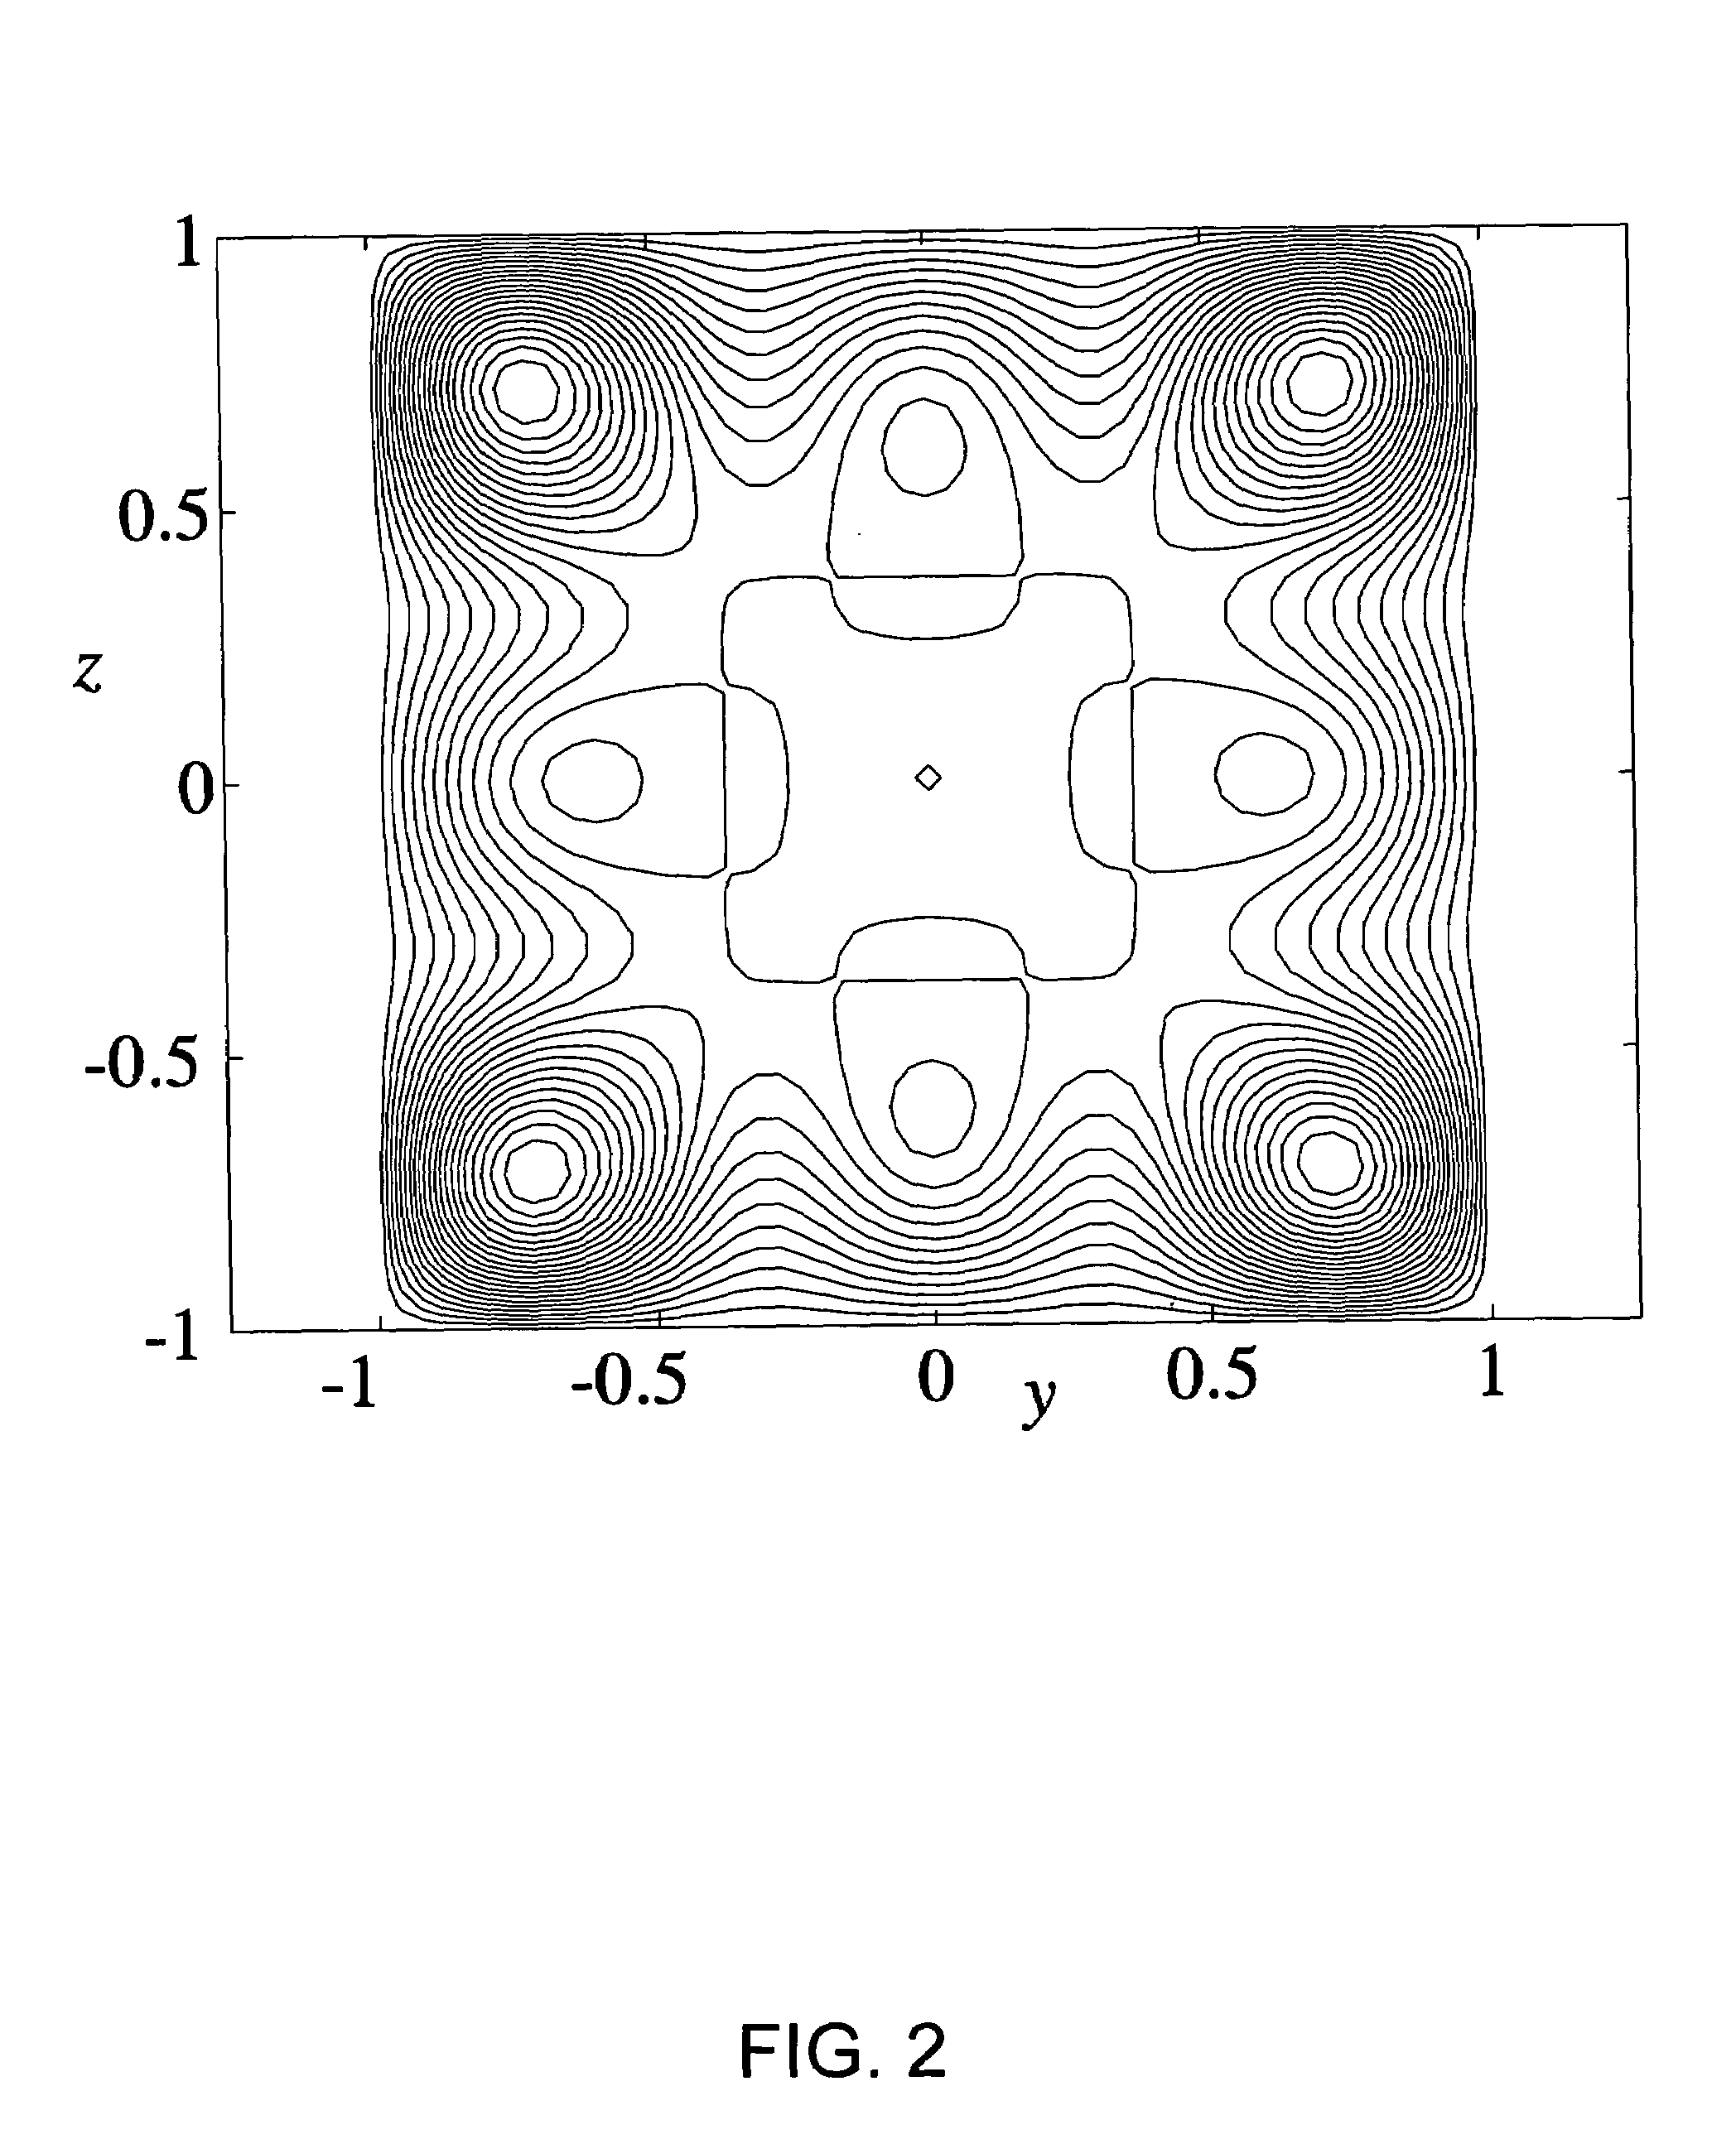 Bi-planar coil assemblies for producing specified magnetic fields